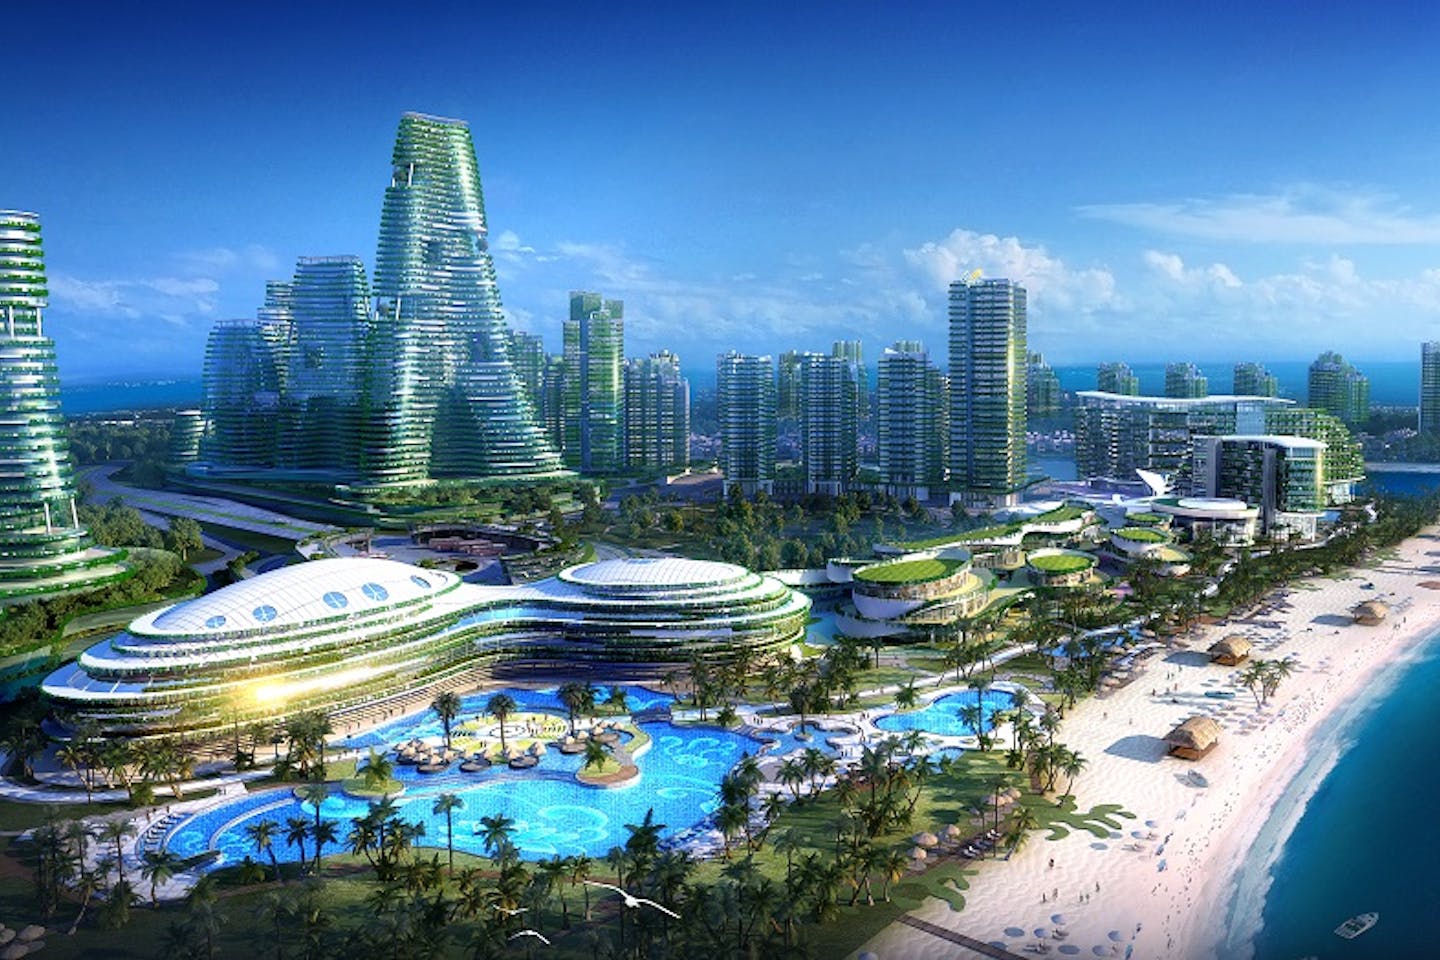 Malaysia&#39;s Forest City primed for green development | News | Eco-Business |  Asia Pacific